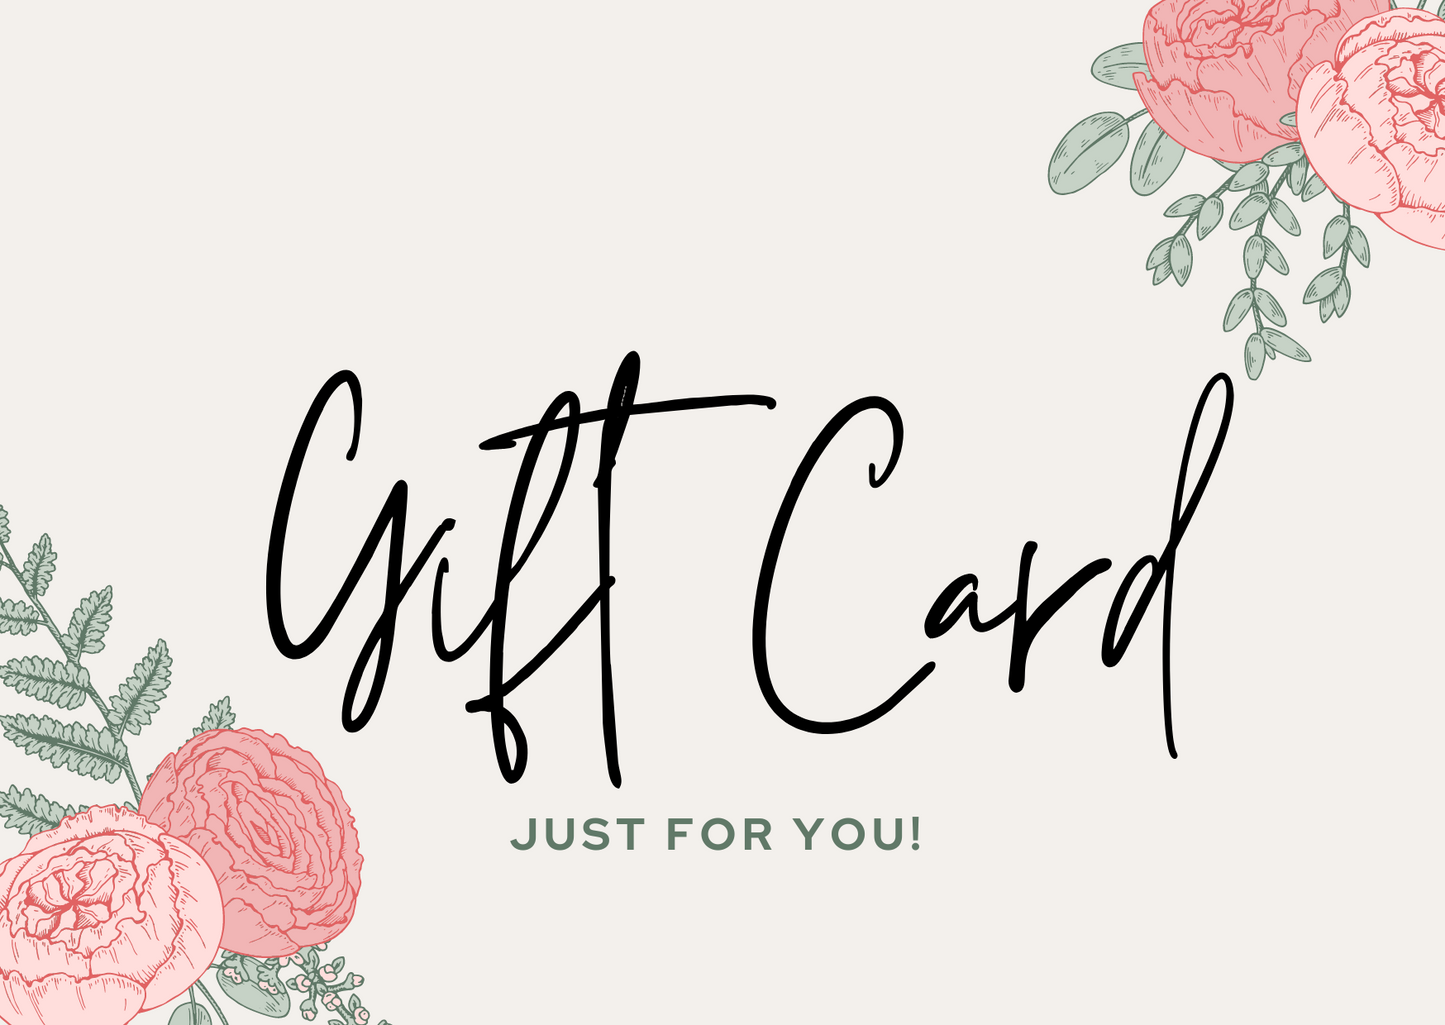 The Tique' by paularae Gift Card